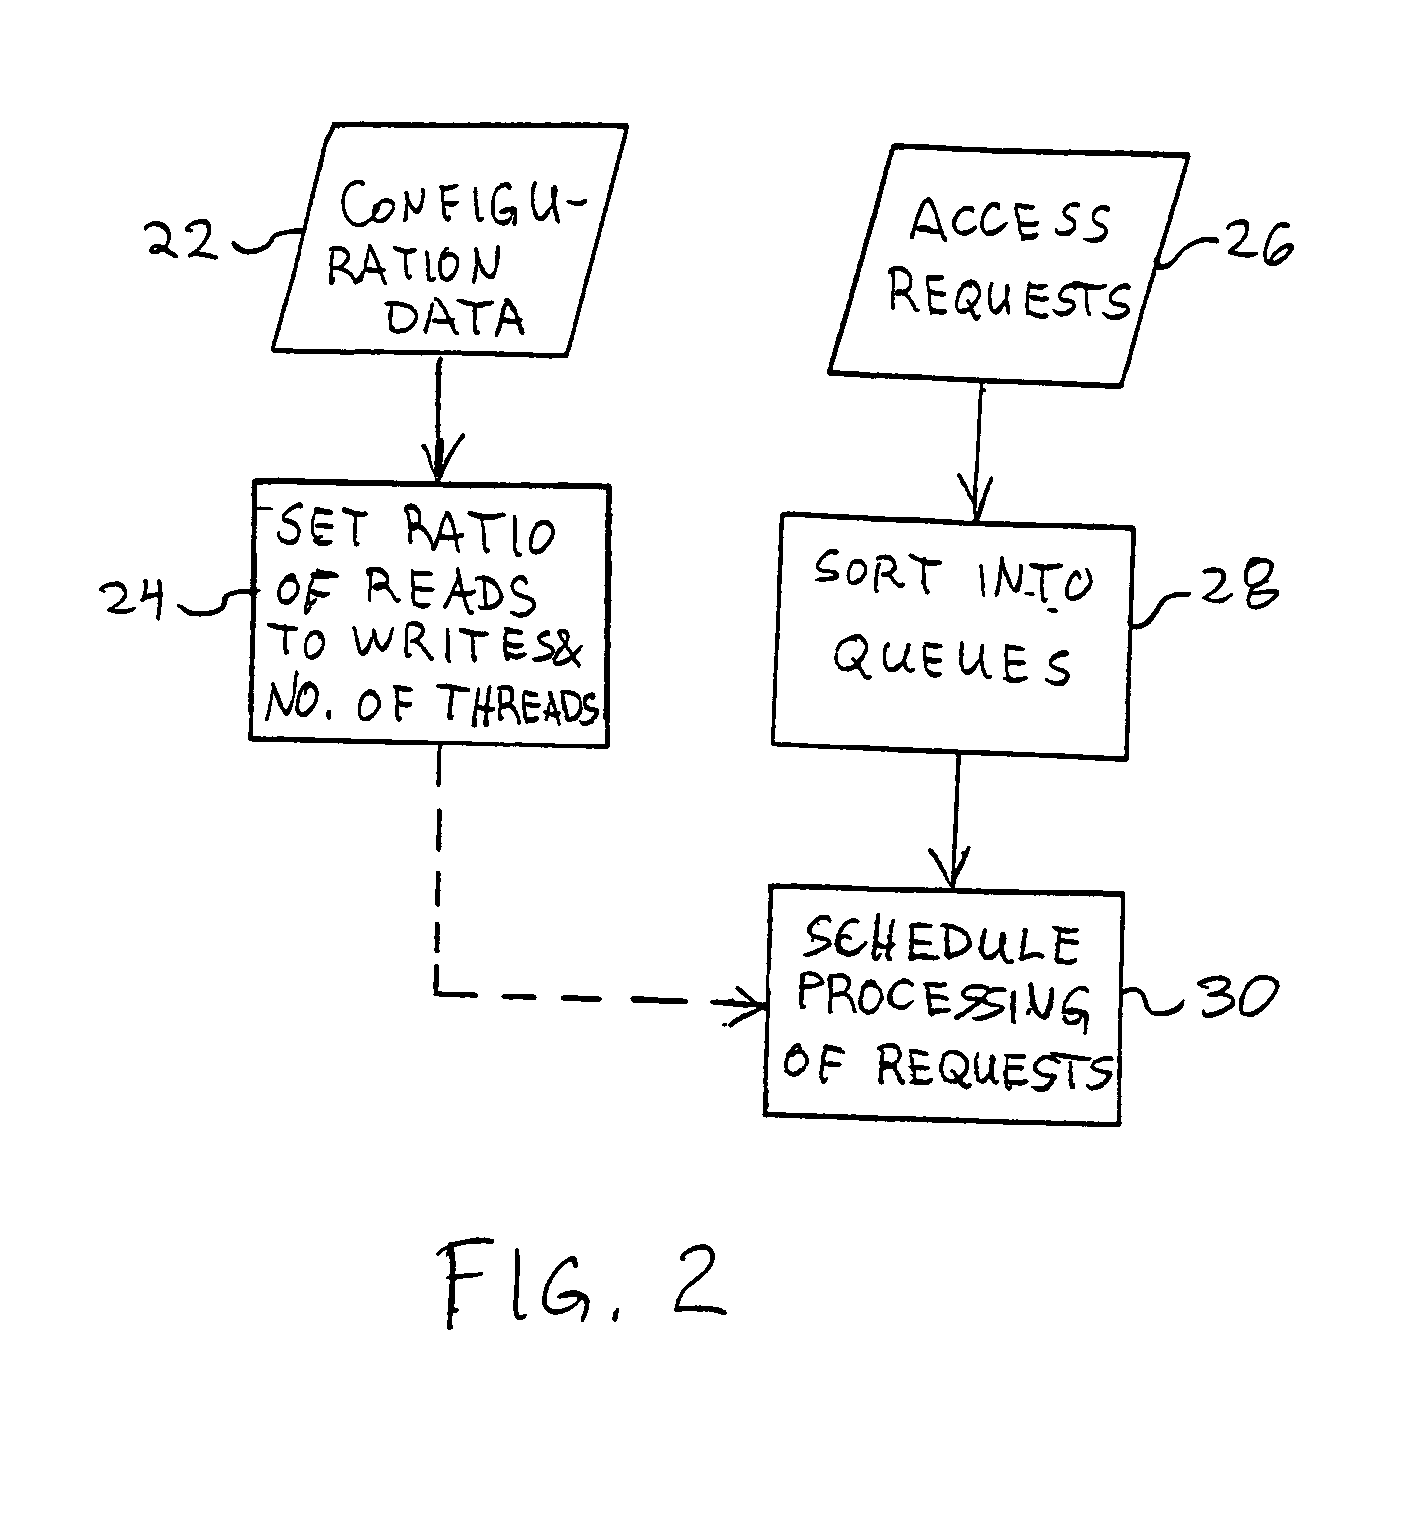 Network filesystem asynchronous I/O scheduling